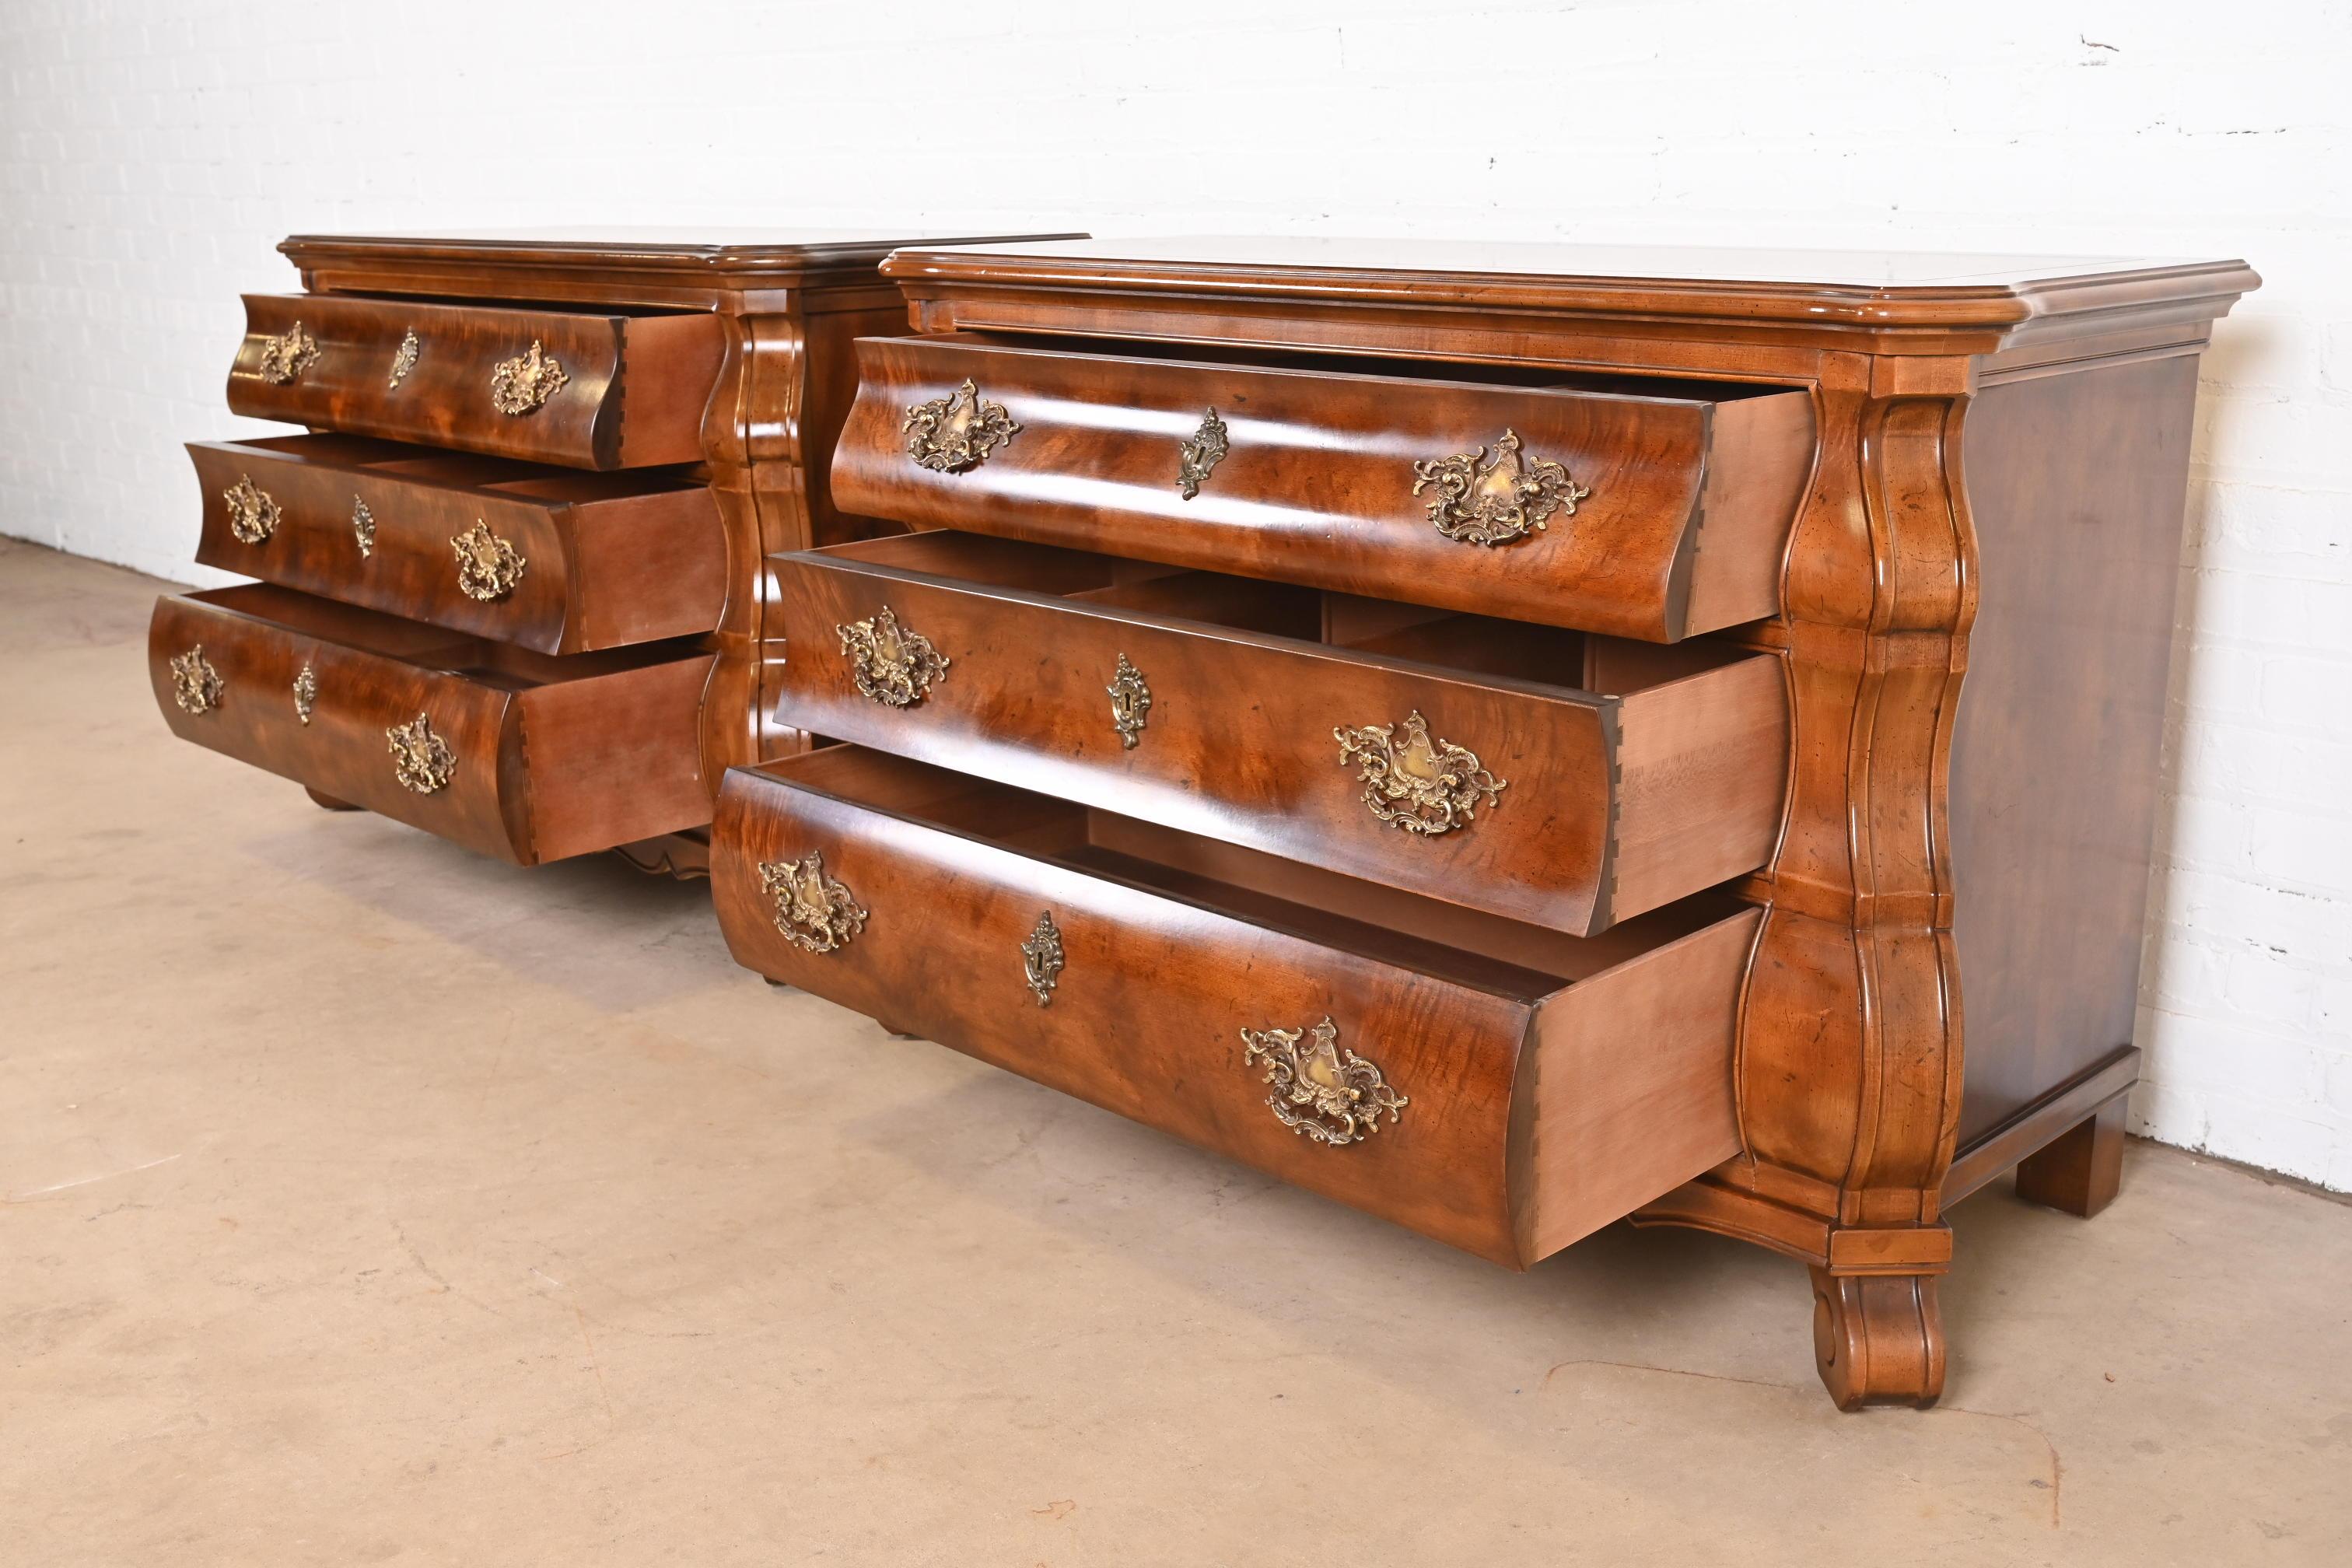 Henredon Italian Baroque Burled Mahogany Bombay Chests or Commodes, Pair For Sale 5